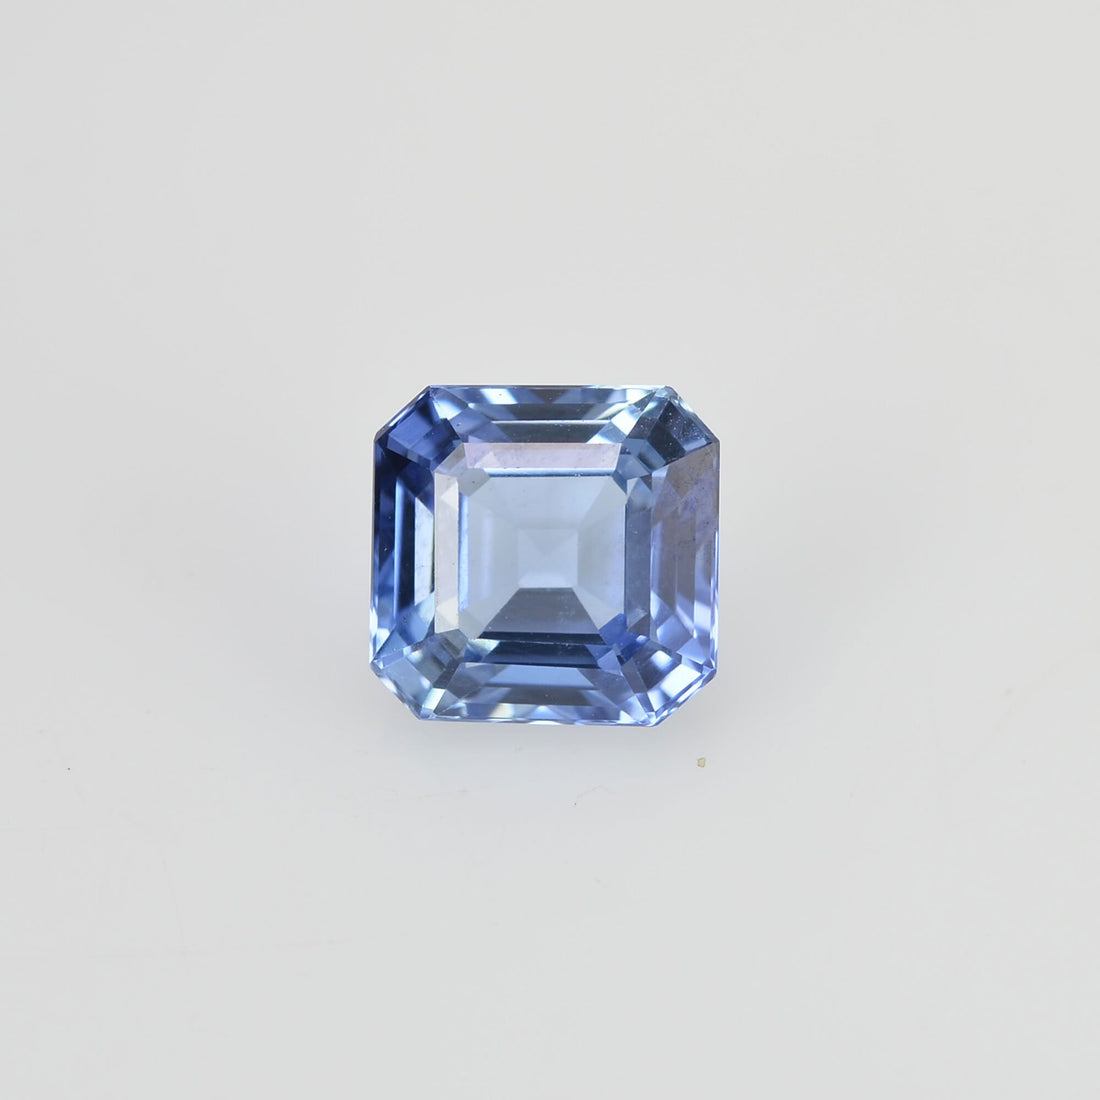 1.41 cts Unheated Natural Blue Sapphire Loose Gemstone Octagon Cut